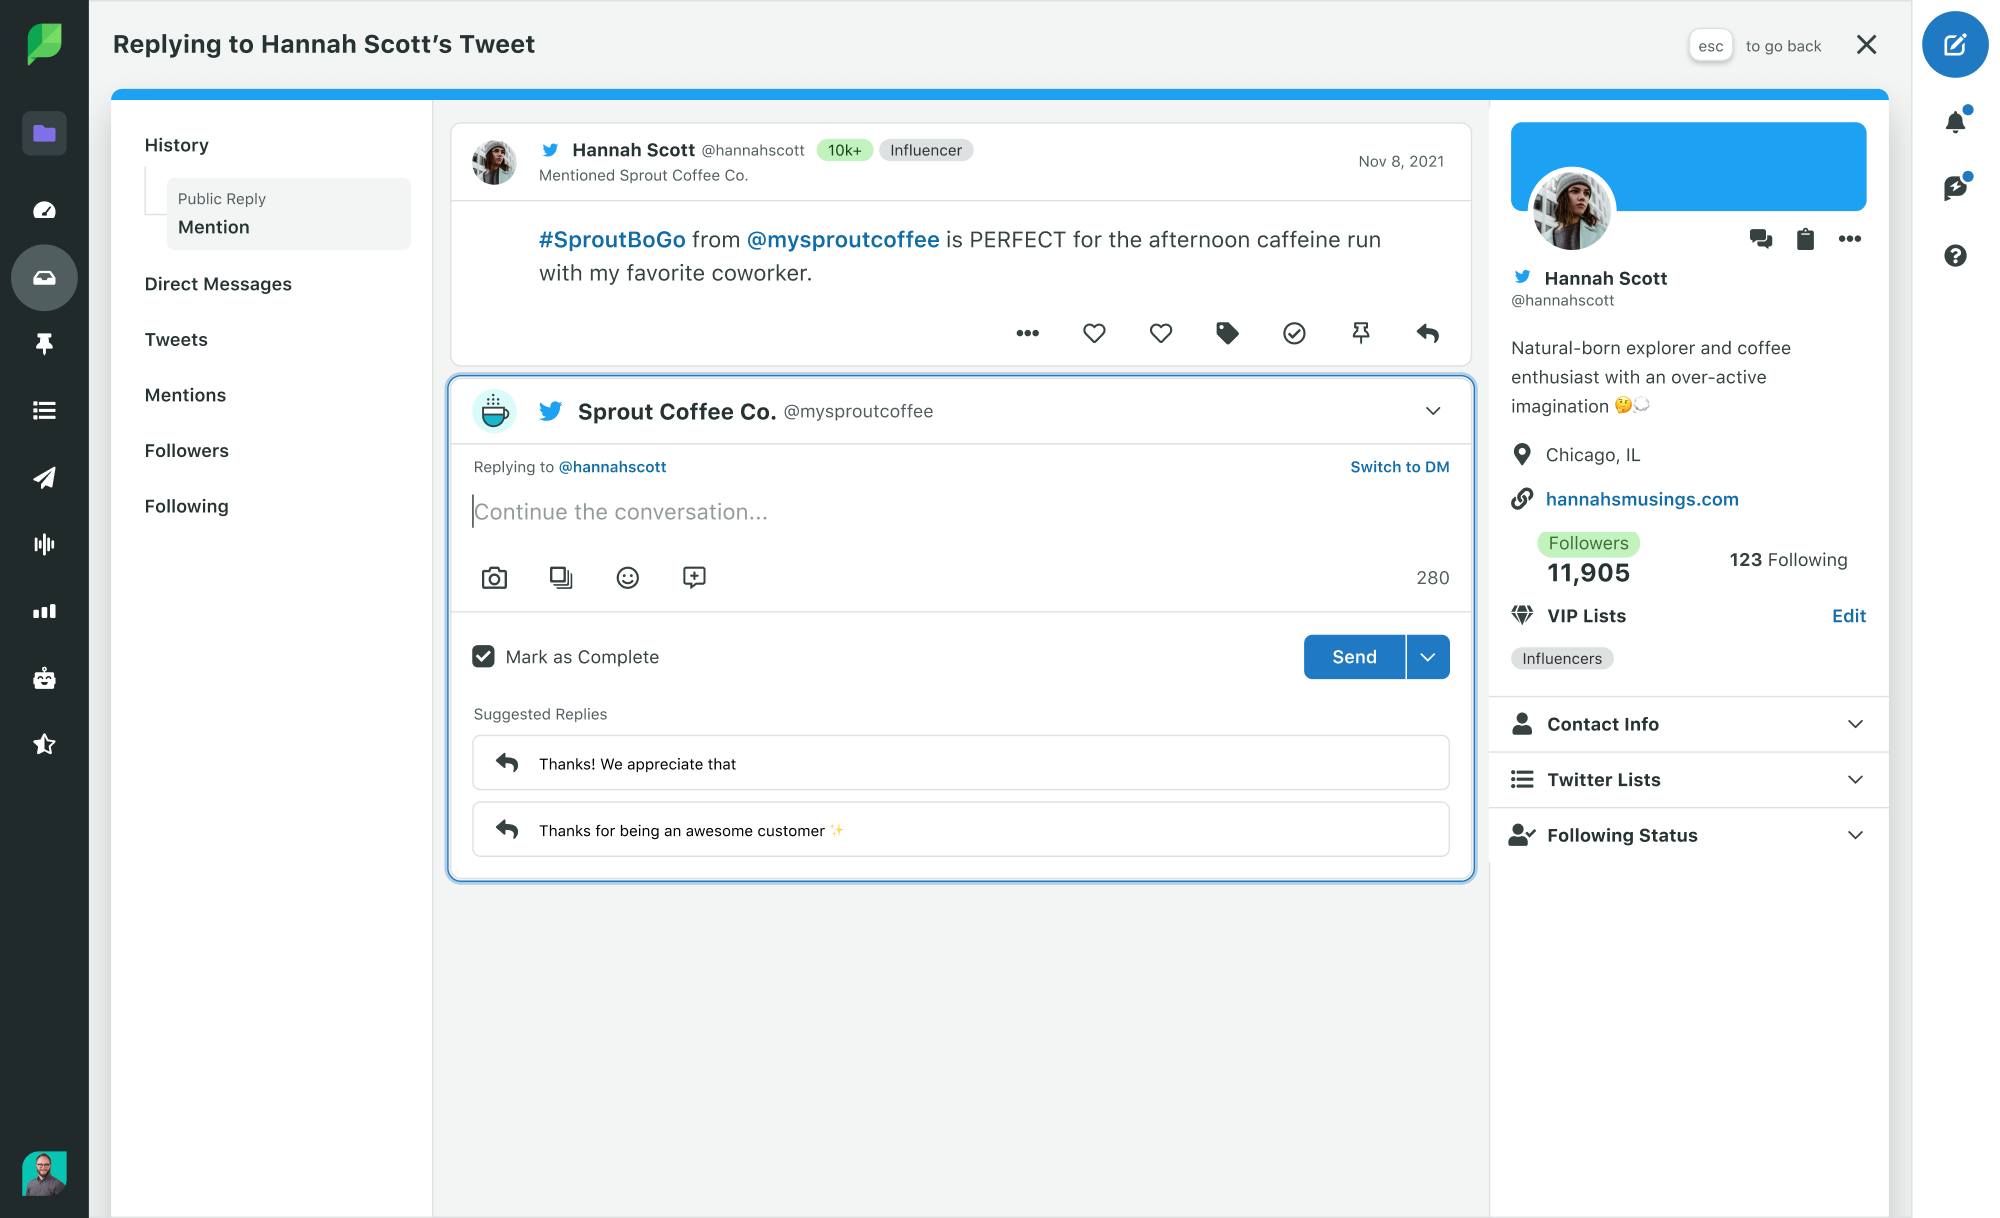 Screenshot of how customer care teams can quickly customize messages and add relevant details for a more personalized feel when responding through Sprout Social